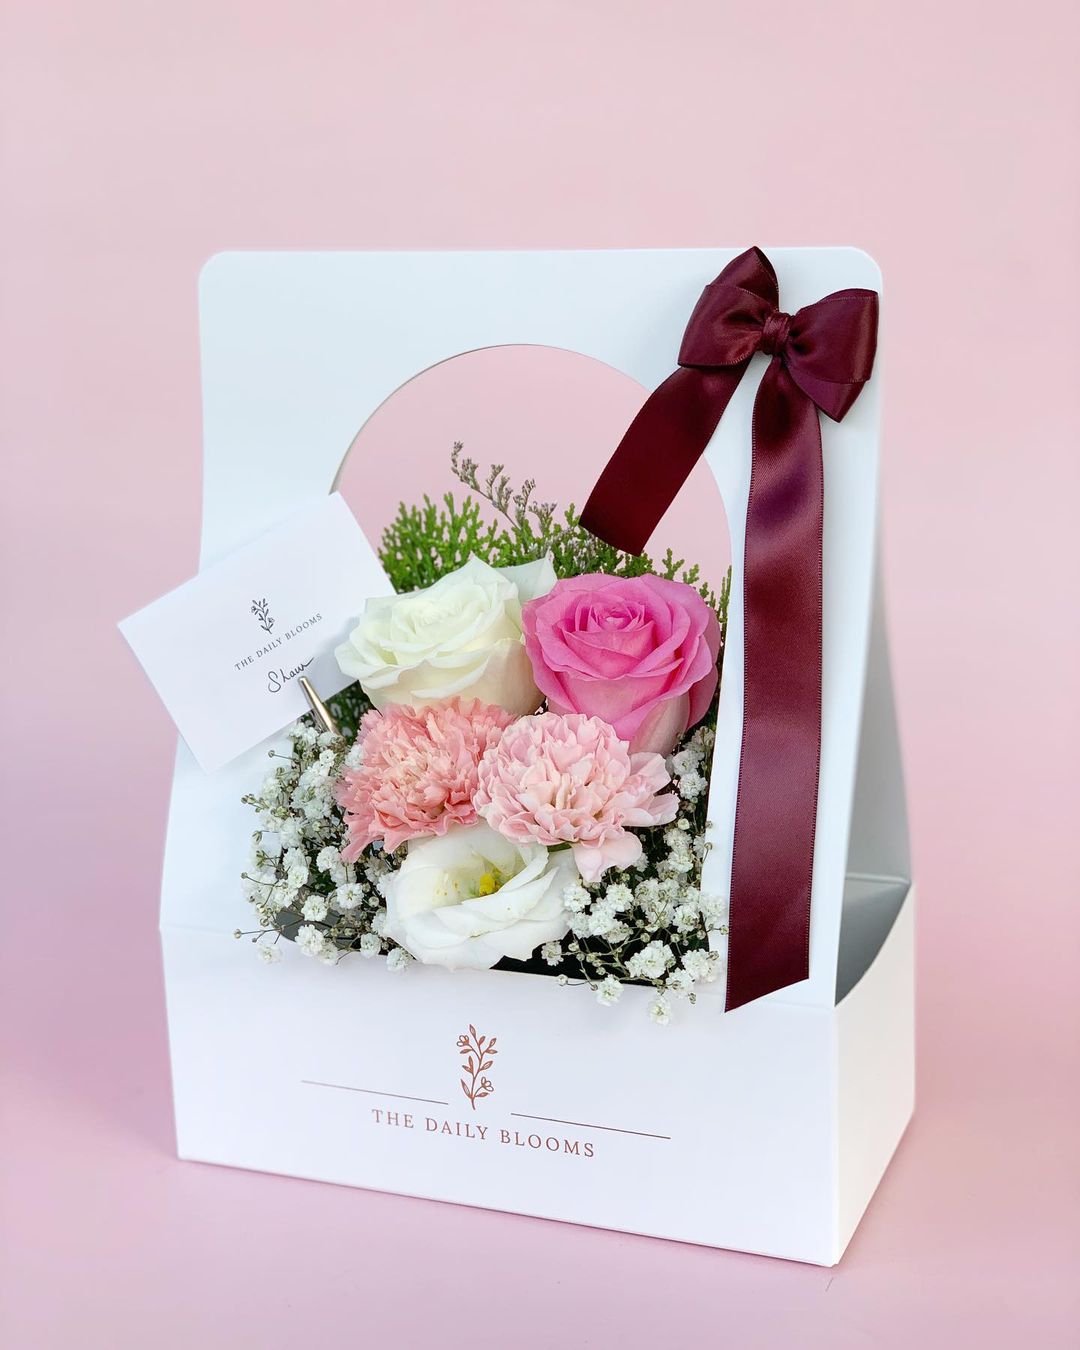 Flower Delivery Singapore - The Daily Blooms